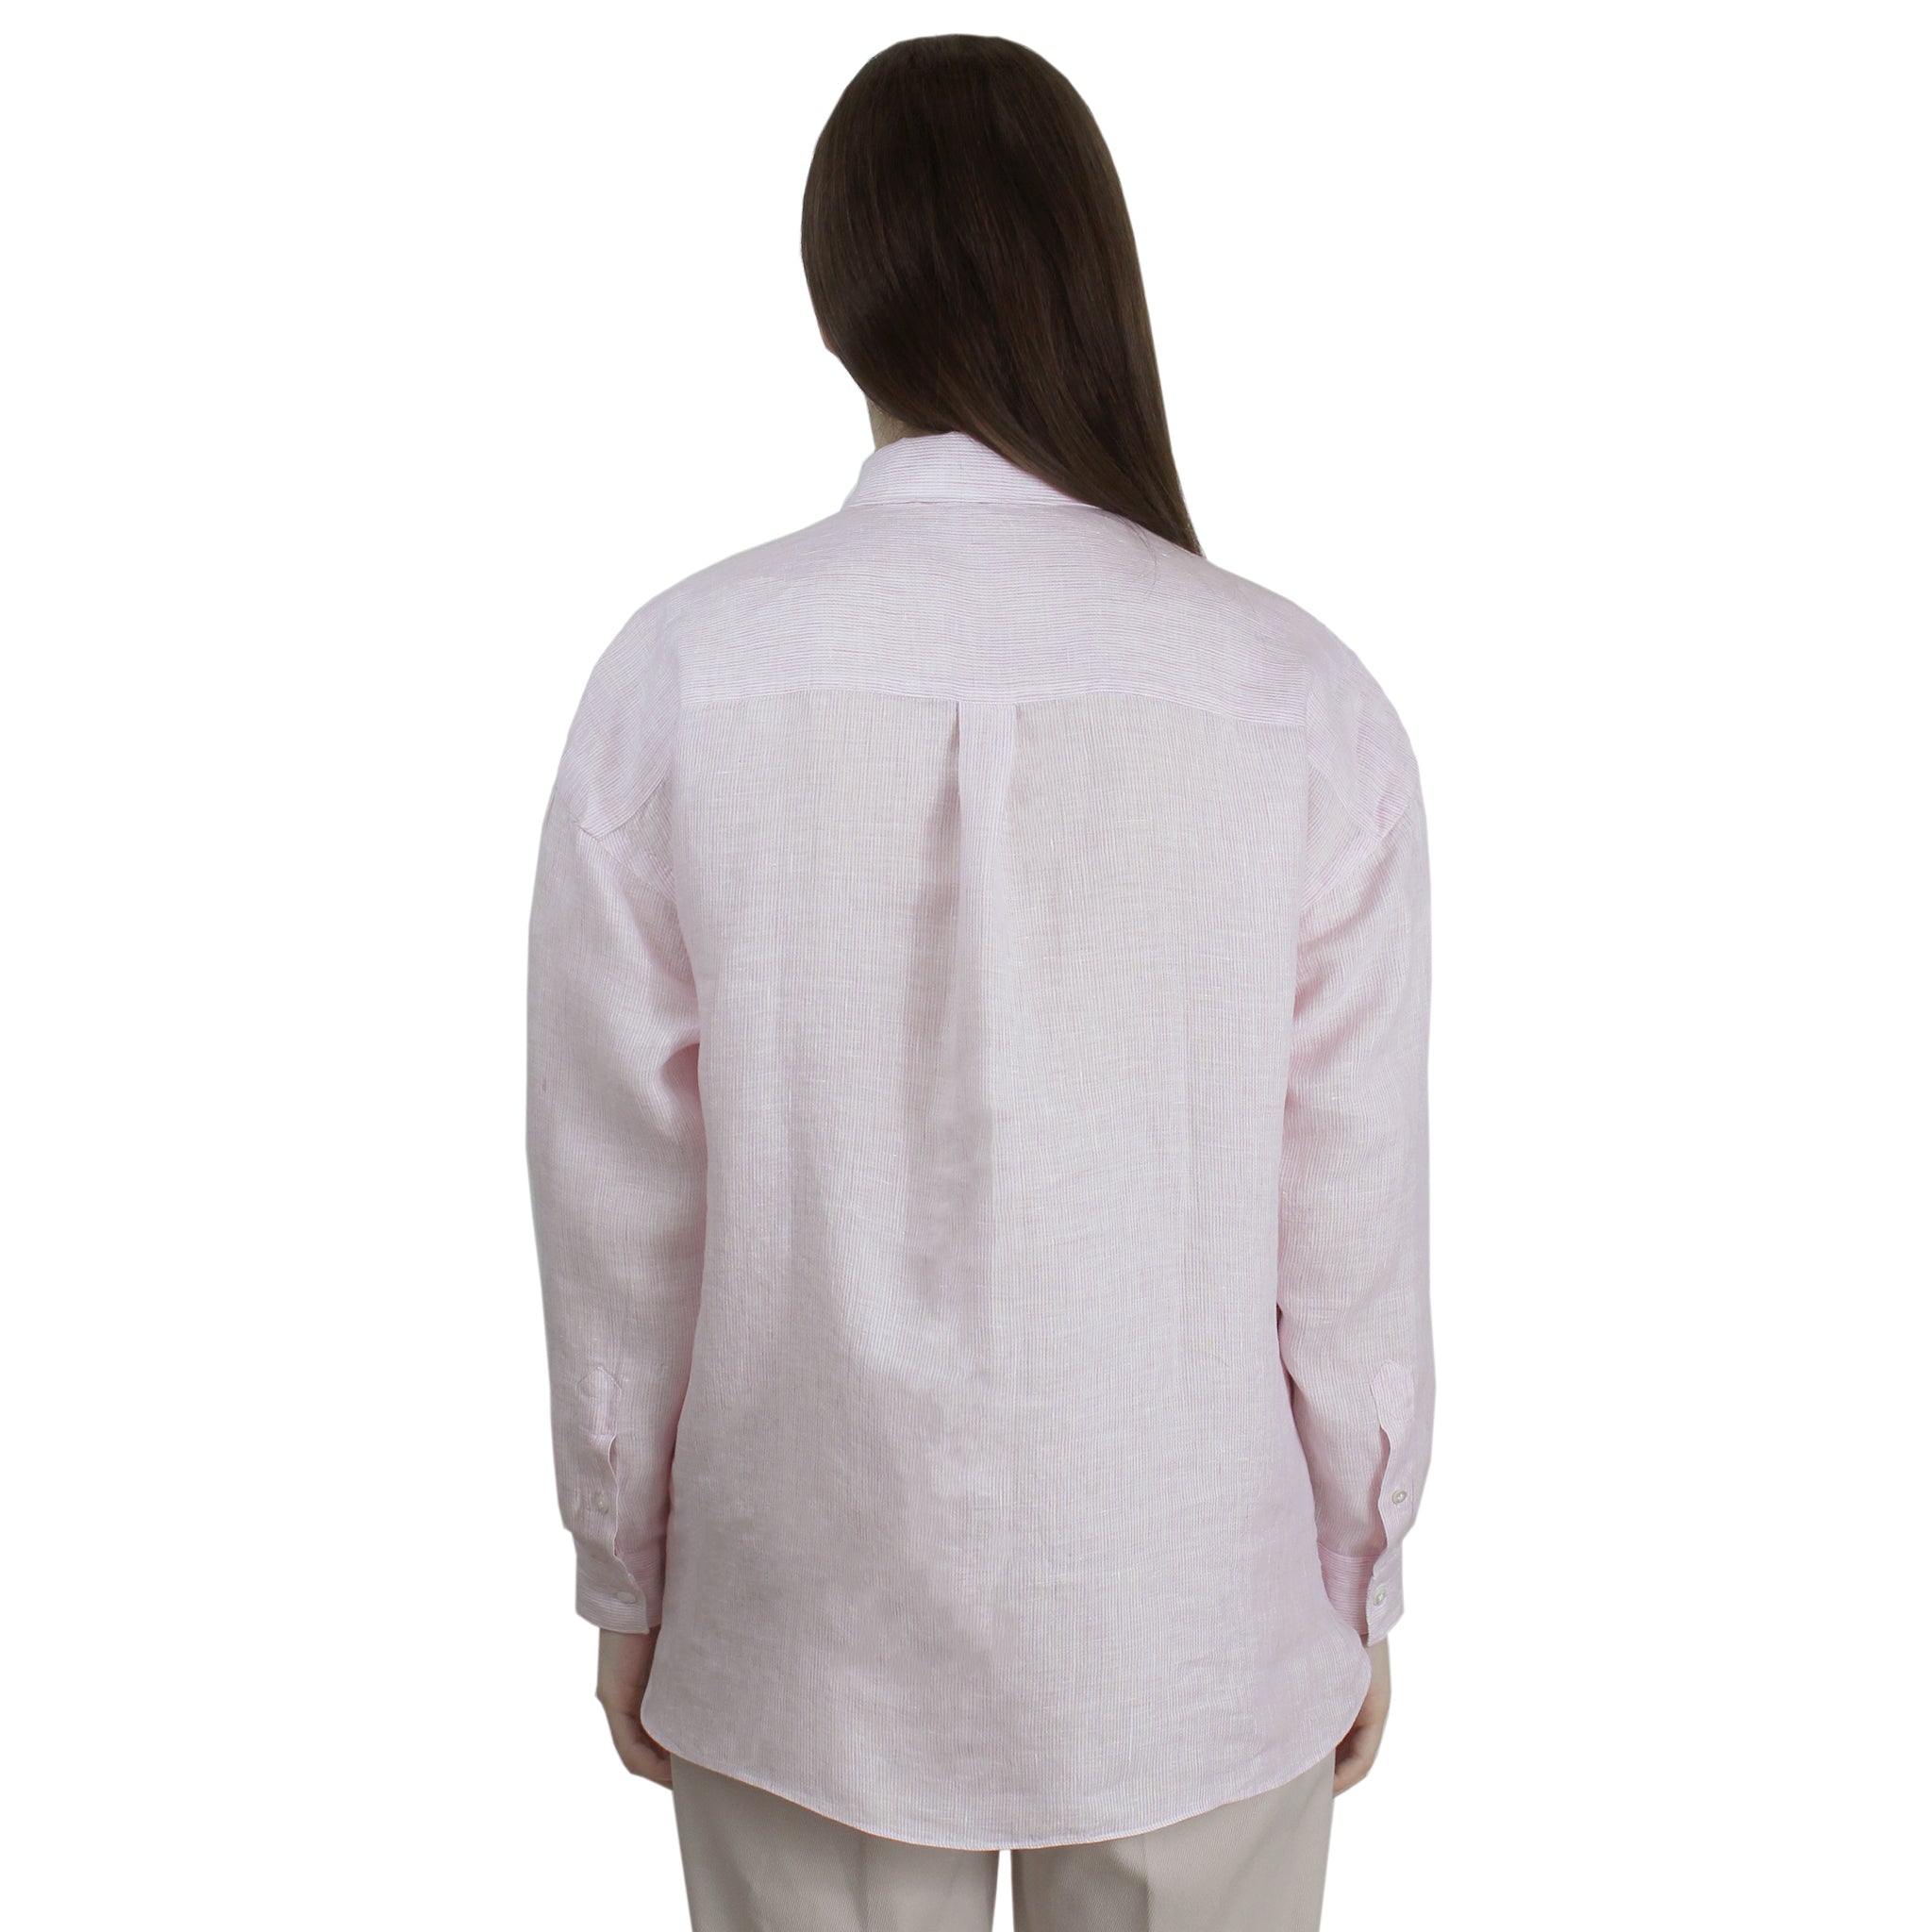 Women's polo-type shirt in pink linen and over fit